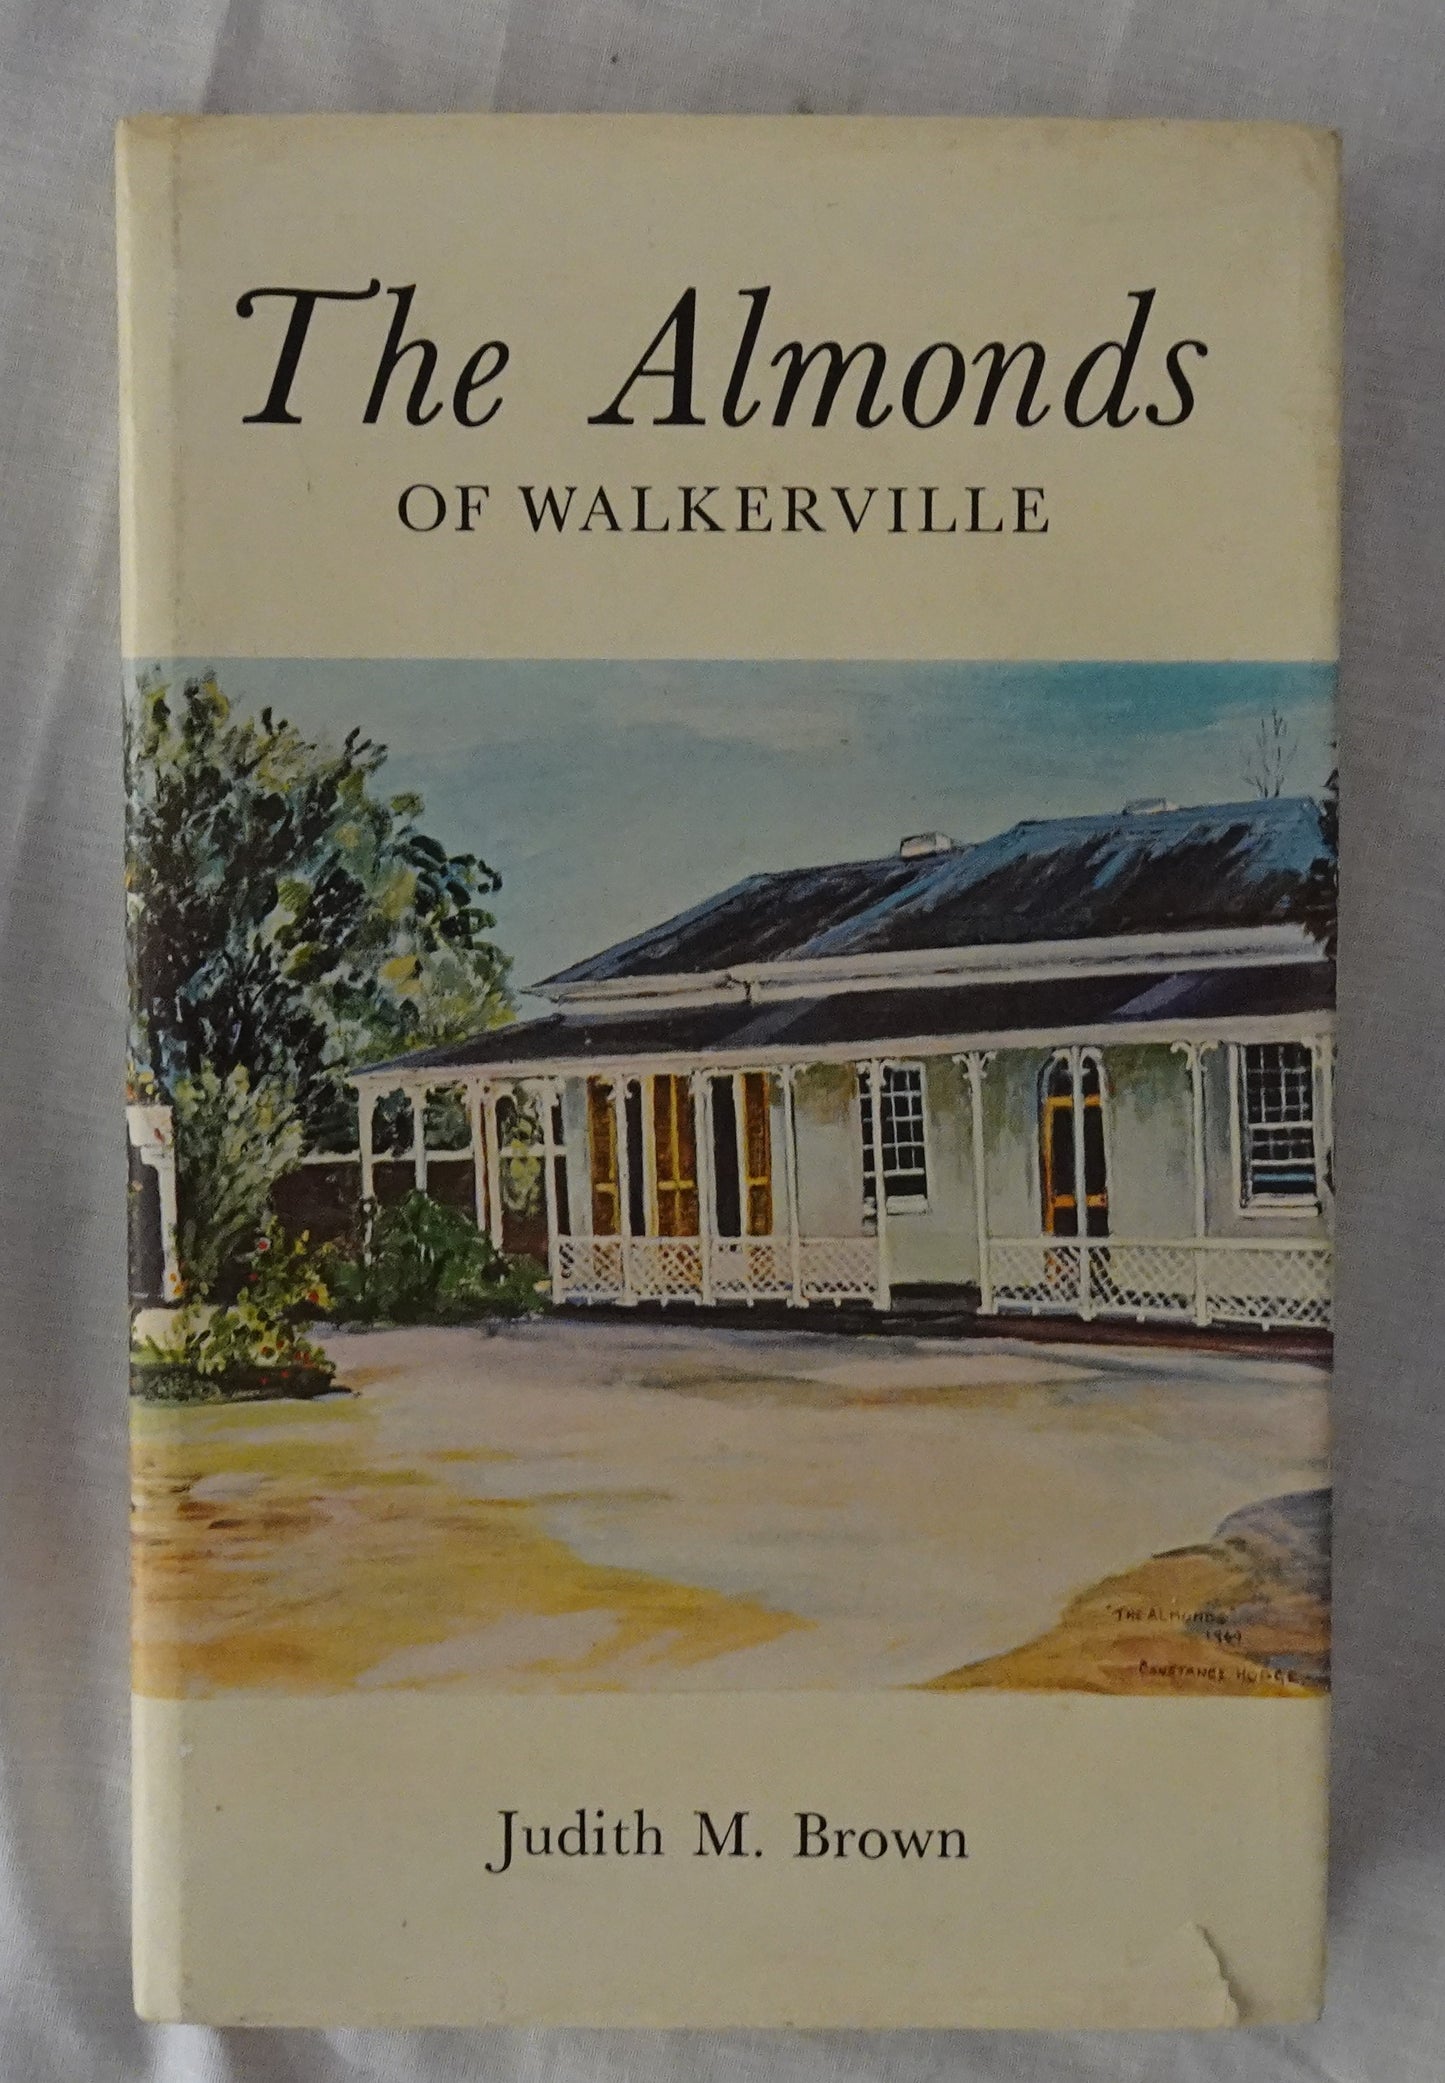 The Almonds of Walkerville by Judith M. Brown